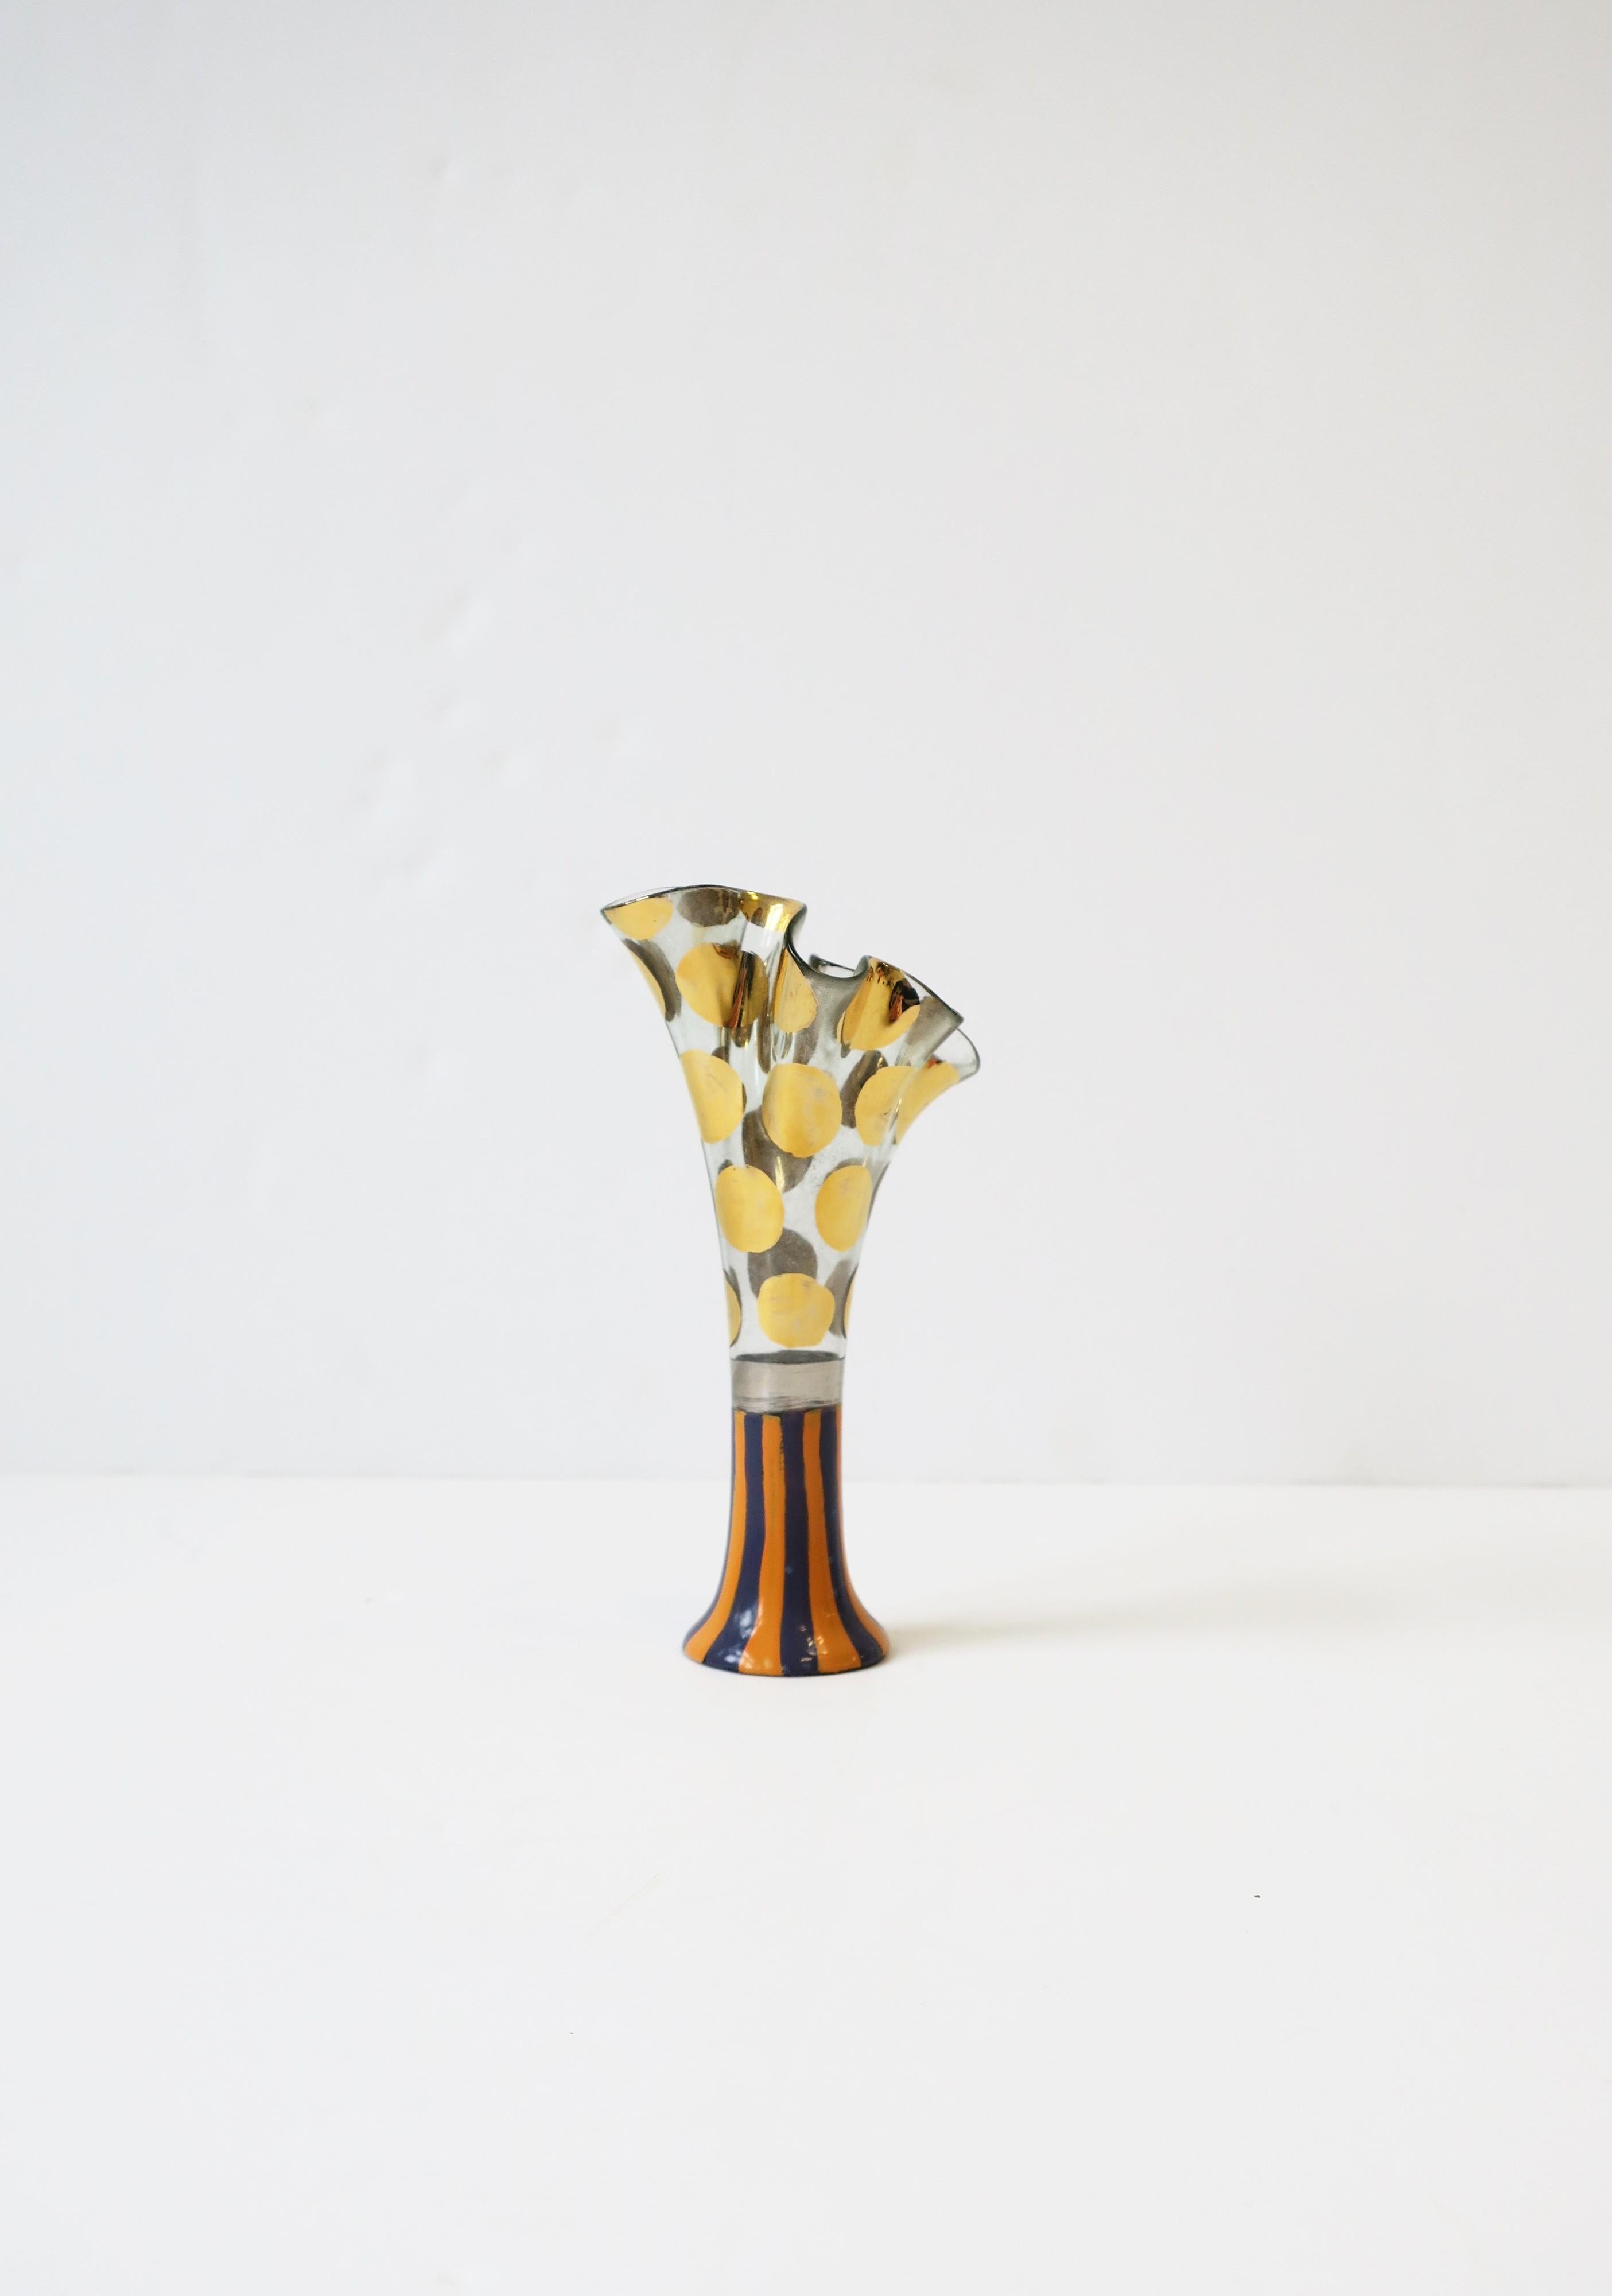 Mackenzie-Childs Art Glass Vase with Gold Polka Dots, circa 1980s For Sale 3